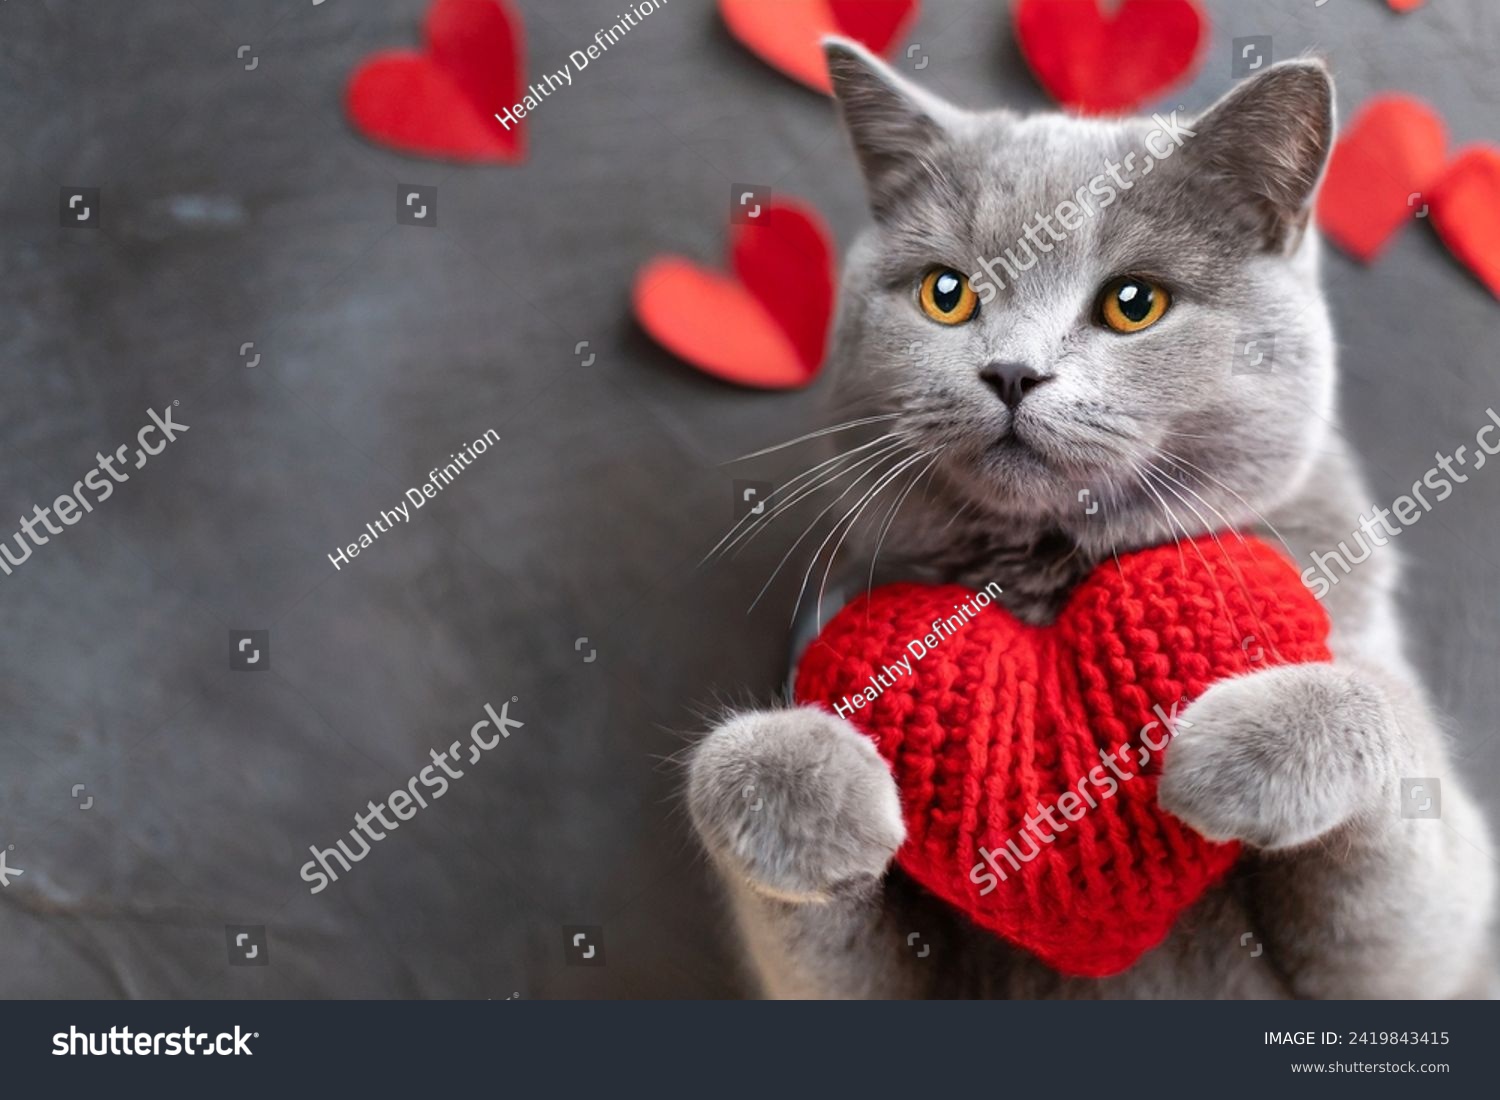 Red knitted heart in the paws of a cat. a gray and black fluffy cat for Valentine's Day or postcard. Textured background with a cat. copy space. valentine's day, lovers day, love concept #2419843415